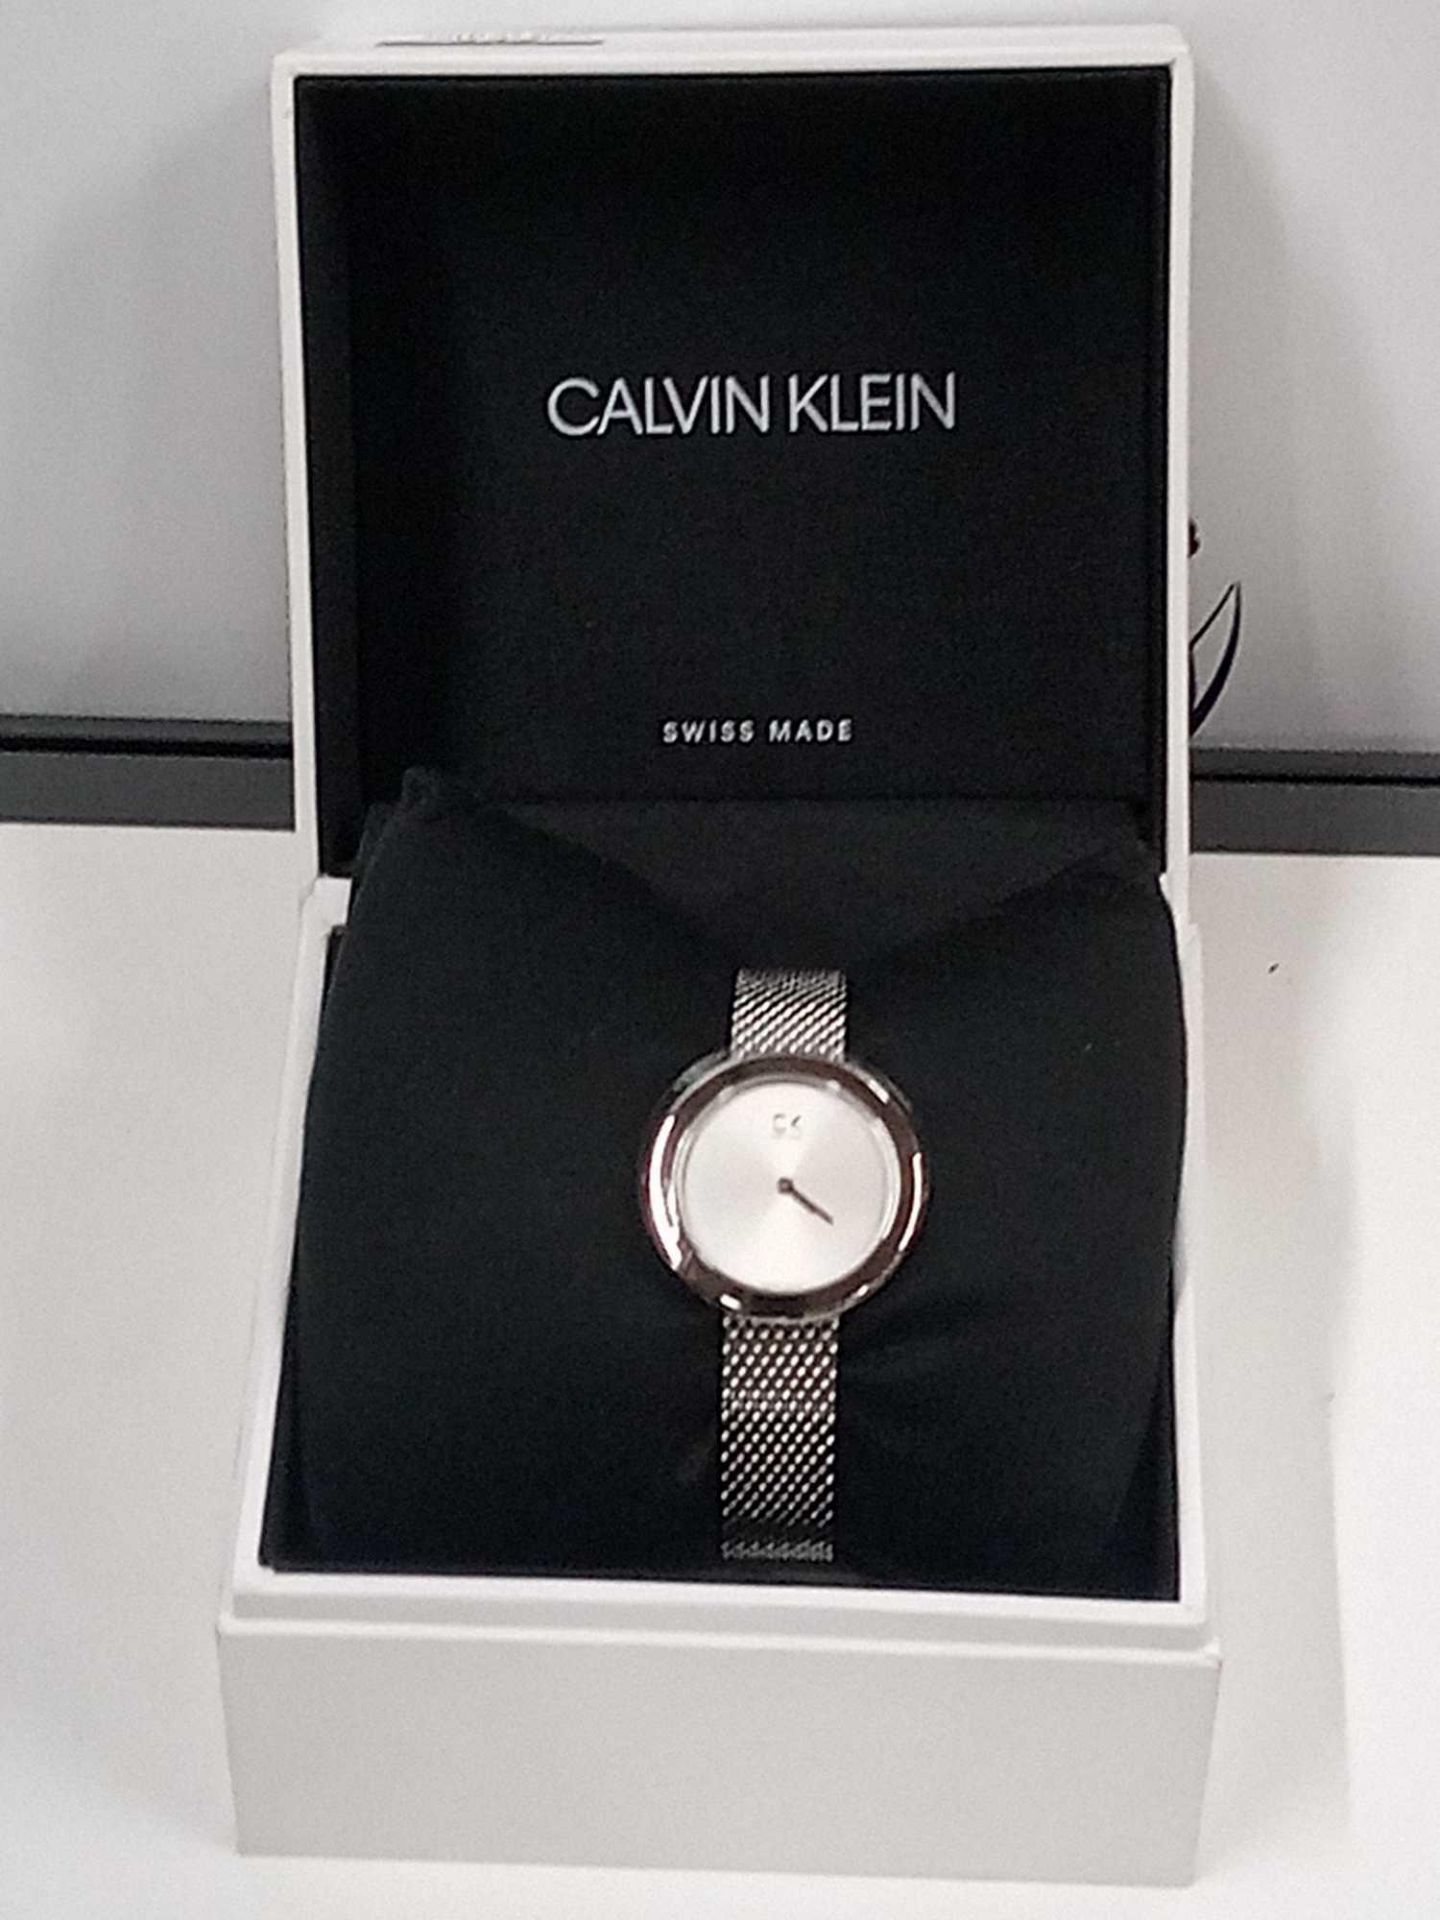 RRP £110 Boxed Calvin Klein Swiss Made Small Face Silver Mesh Watch - Image 3 of 4